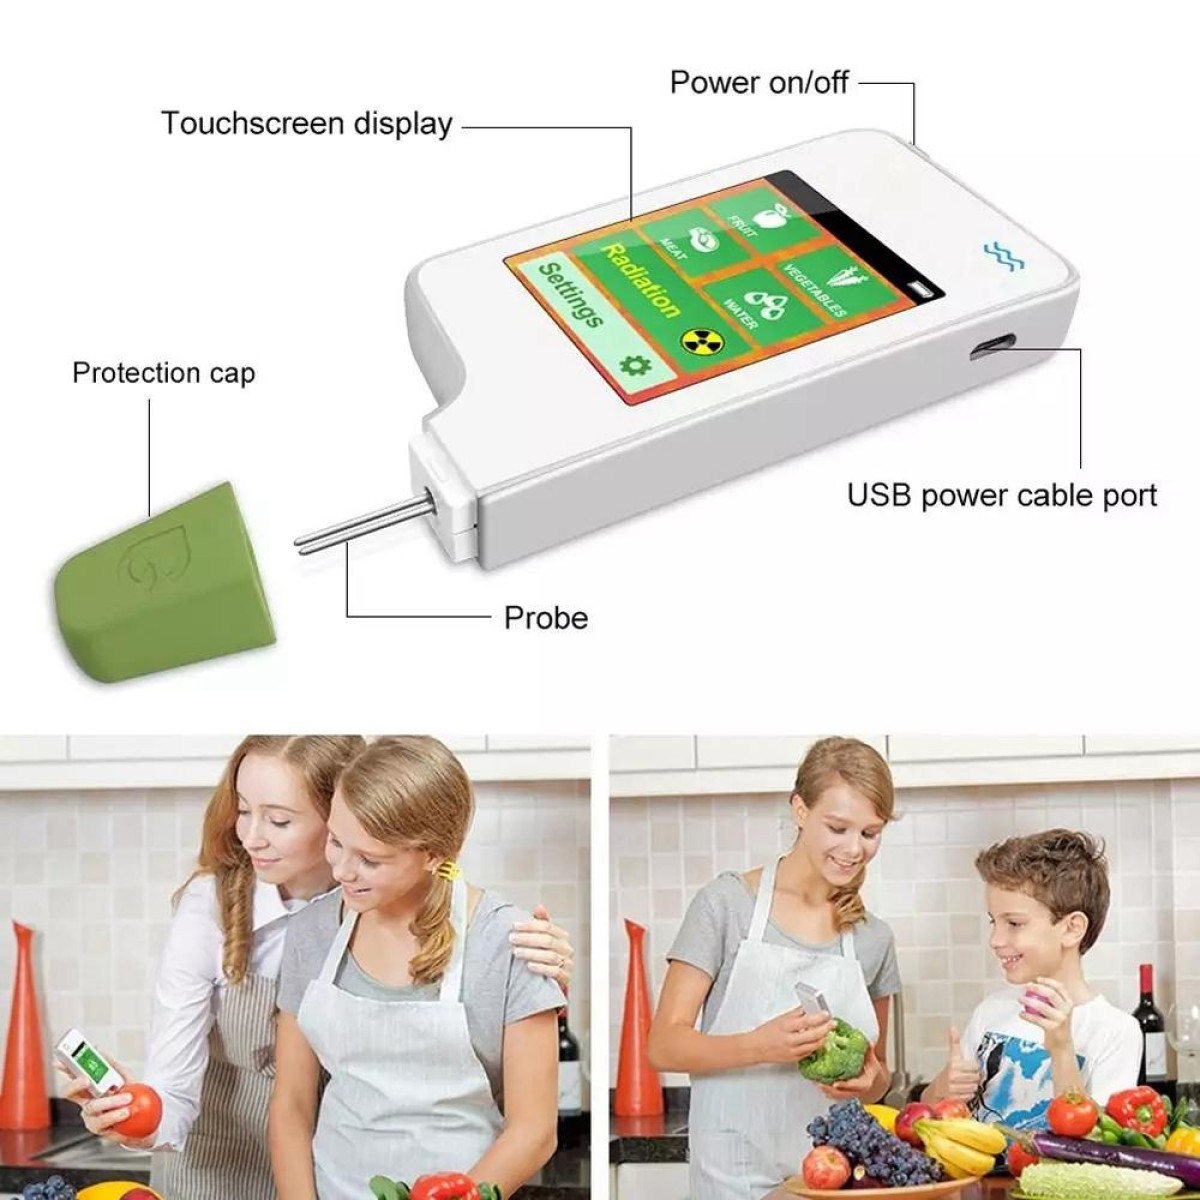 Greentest 2 Food Environmental Safety Detector For Nitrate Residues In Vegetable, Fruit And Meat